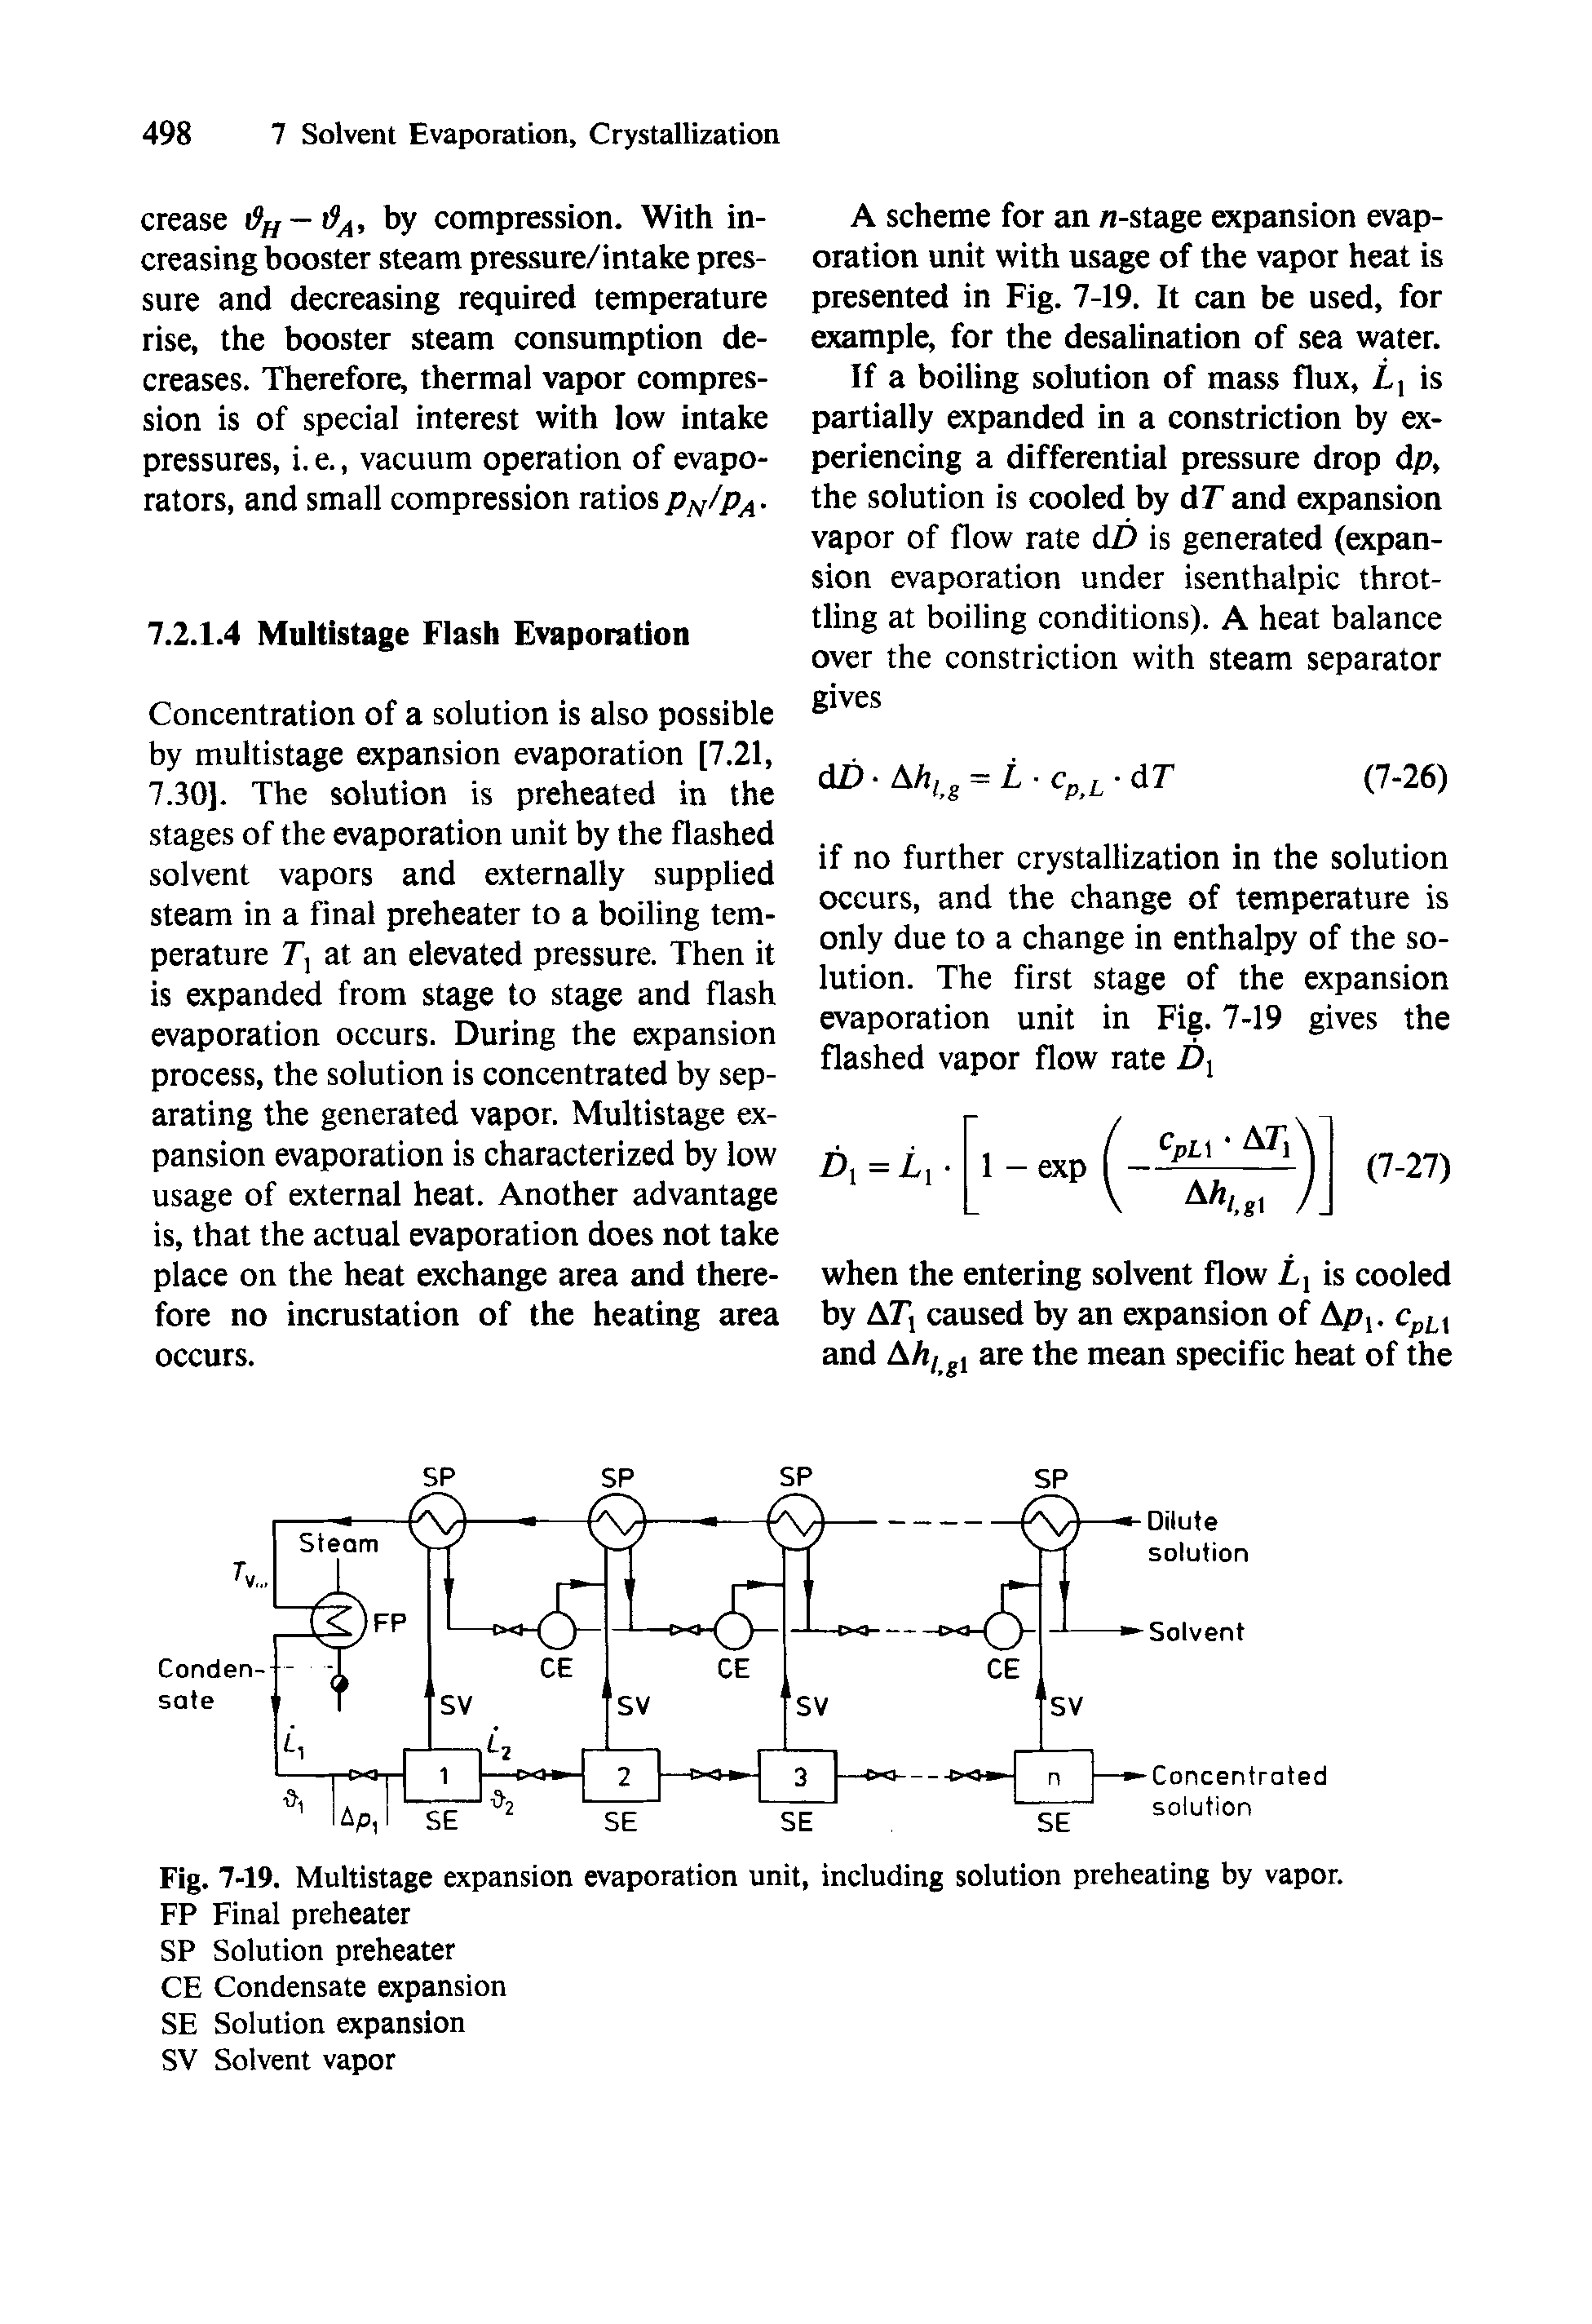 Fig. 7-19. Multistage expansion evaporation unit, including solution preheating by vapor.